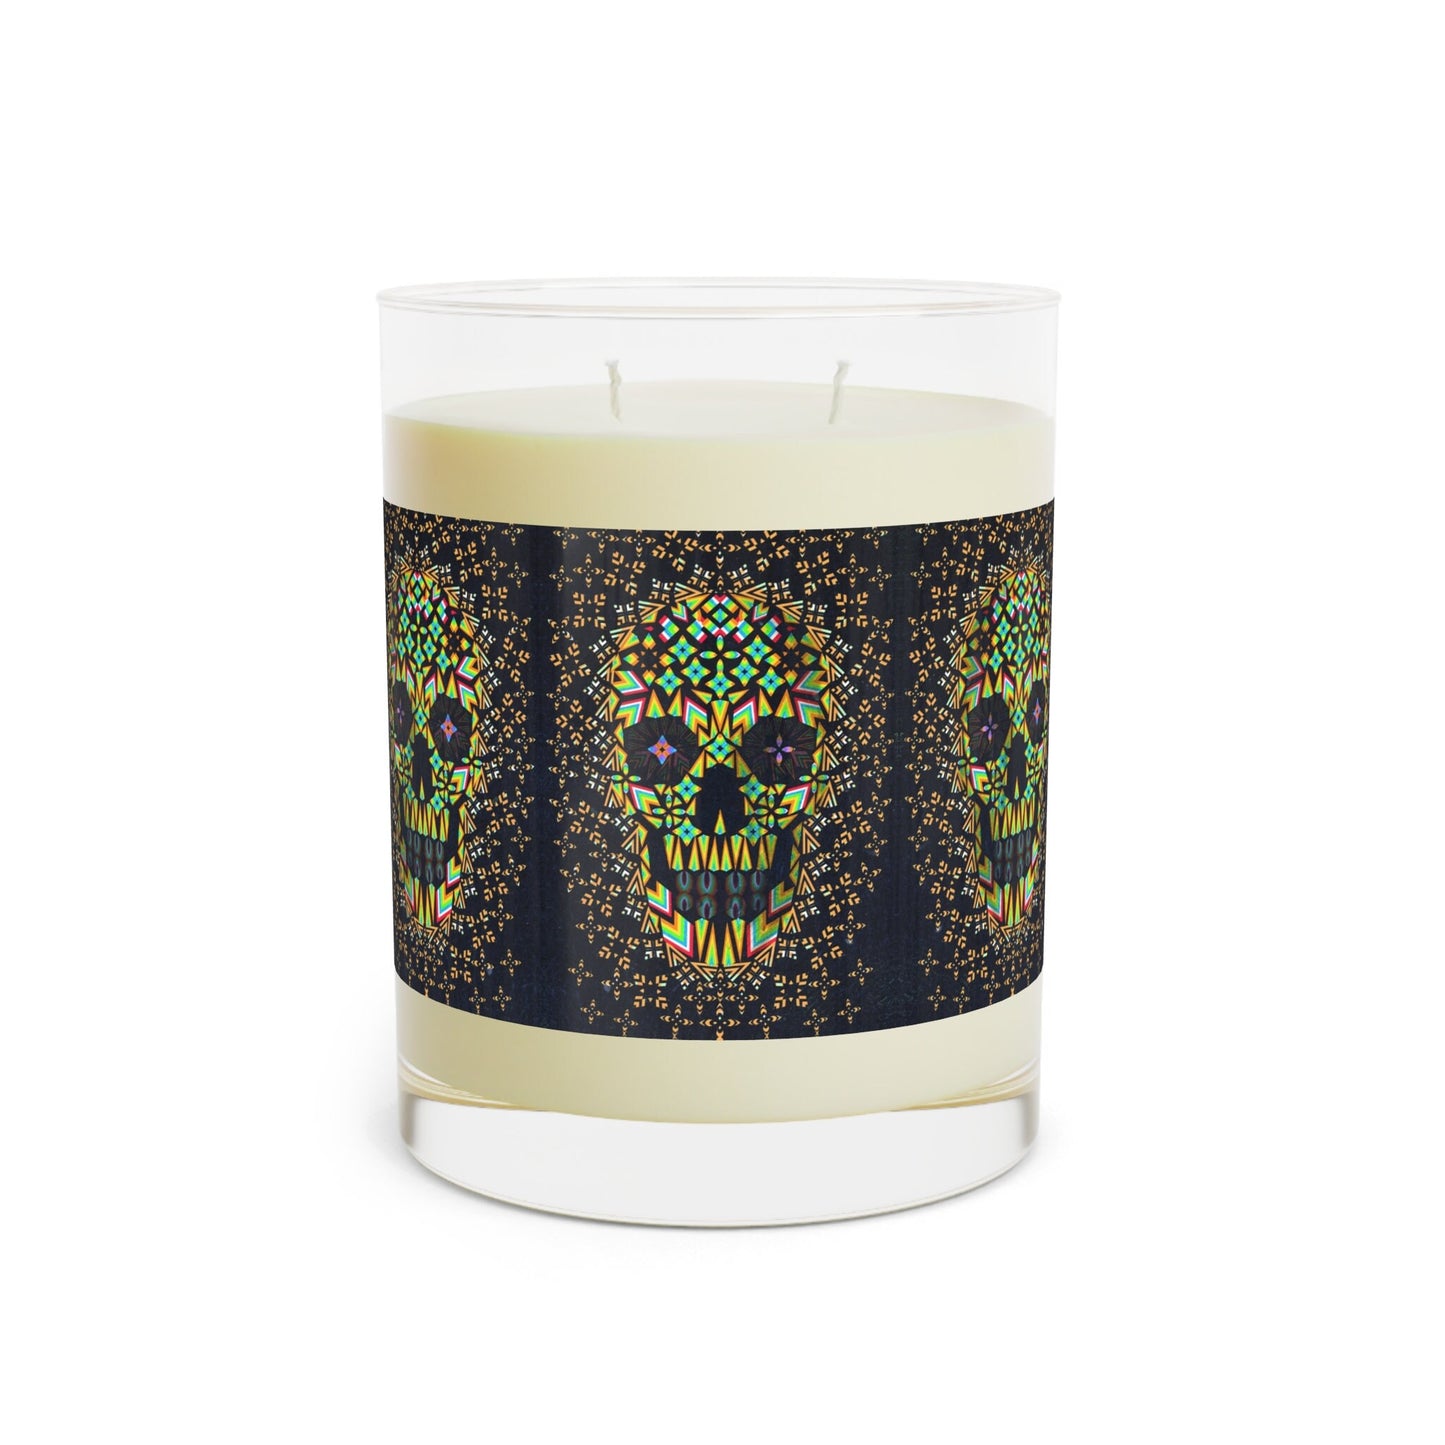 Sugar Skull Candle - Full Glass, 11oz Scented Candle Gift, Lavender Scented Candle Home Decor